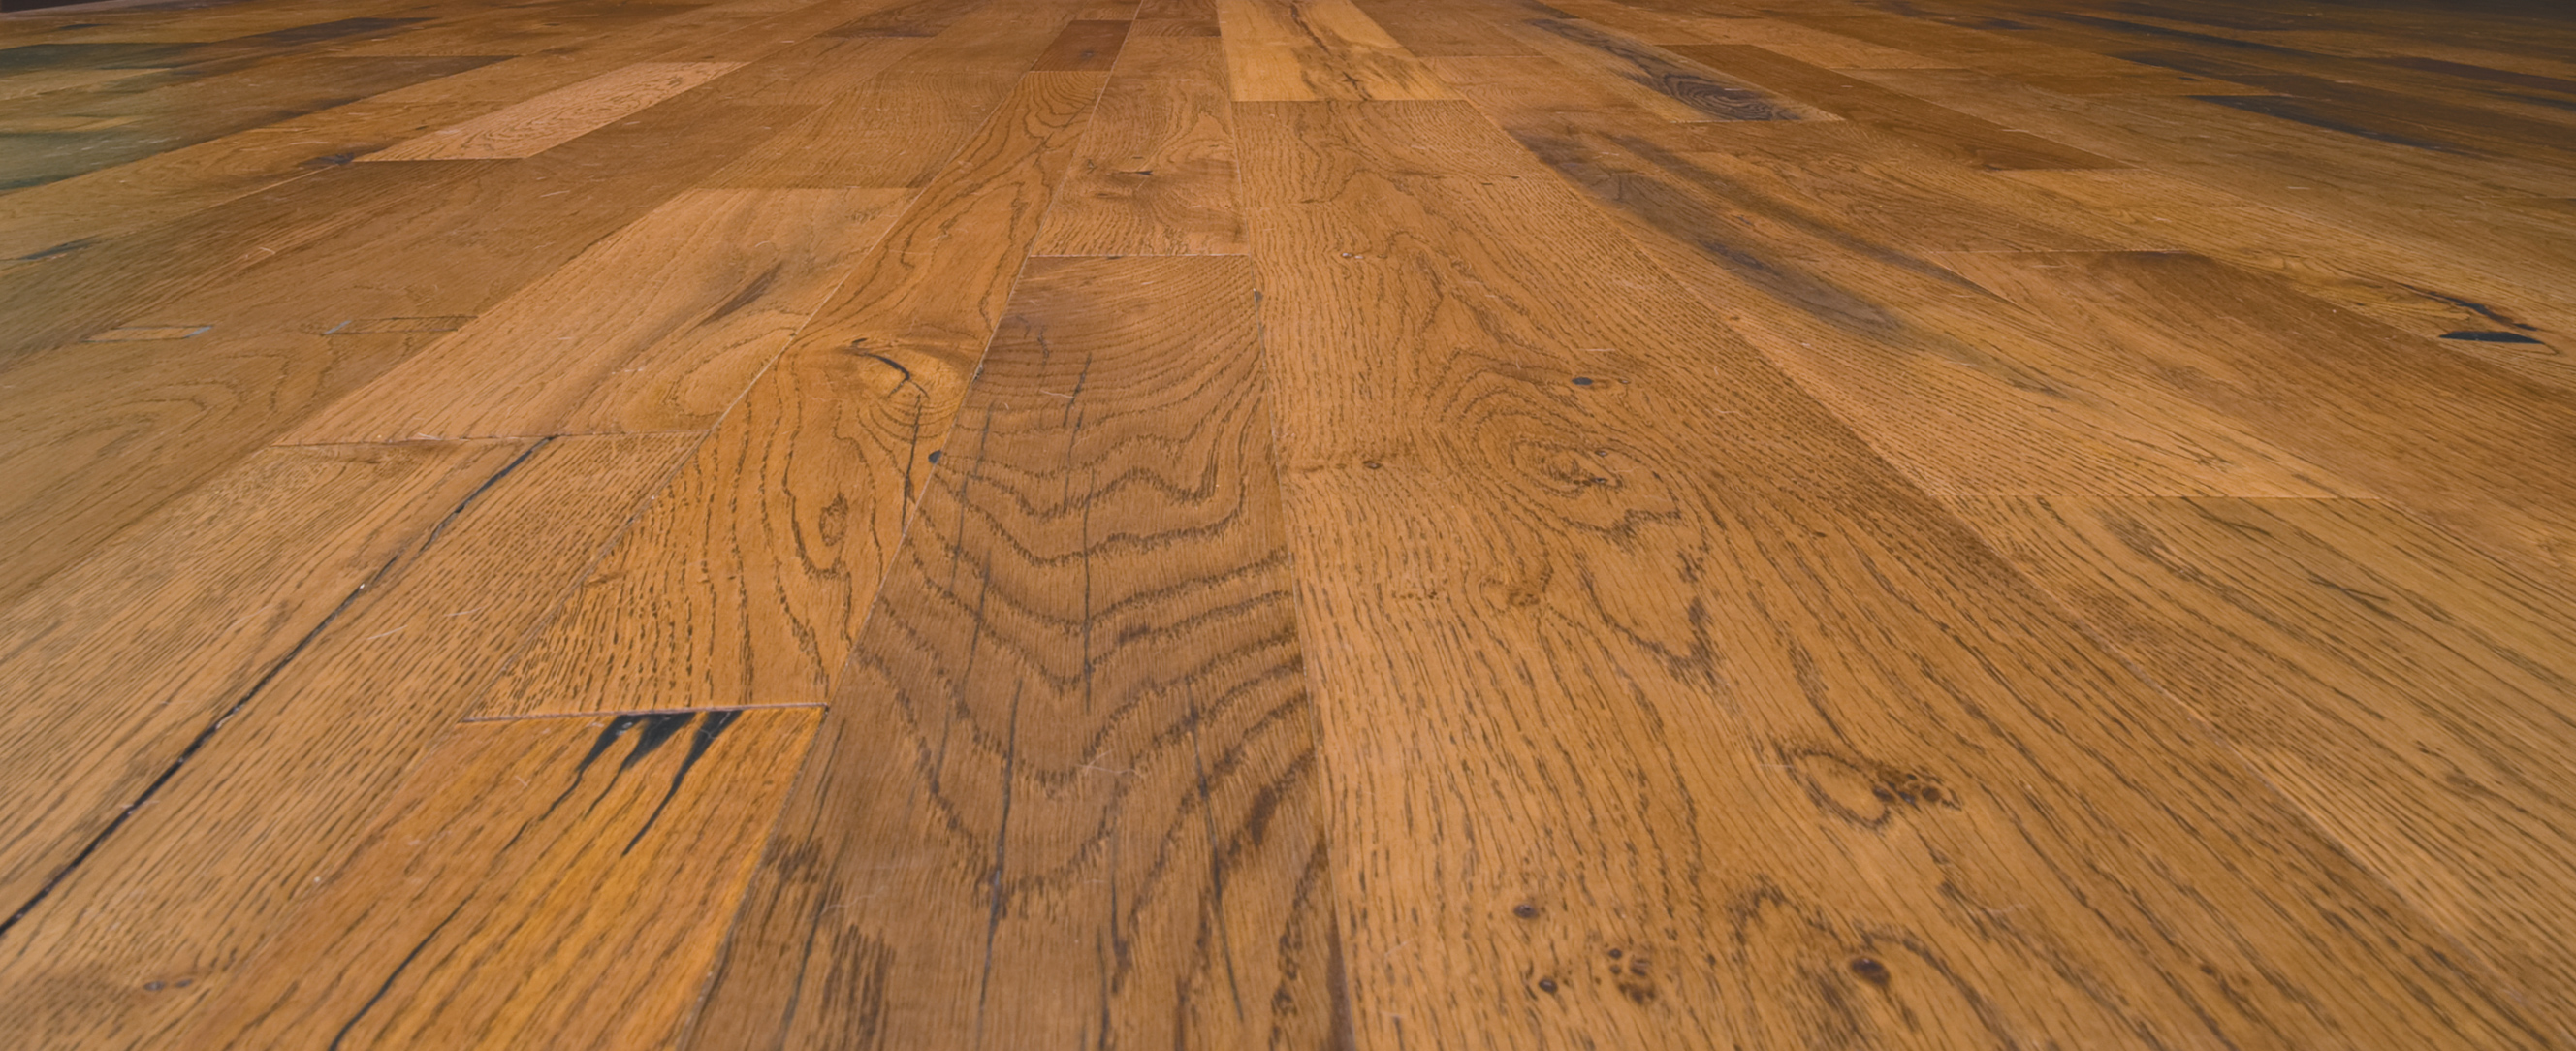 antique oak flooring with a rich patina from stout beer from the original Guinness brewery